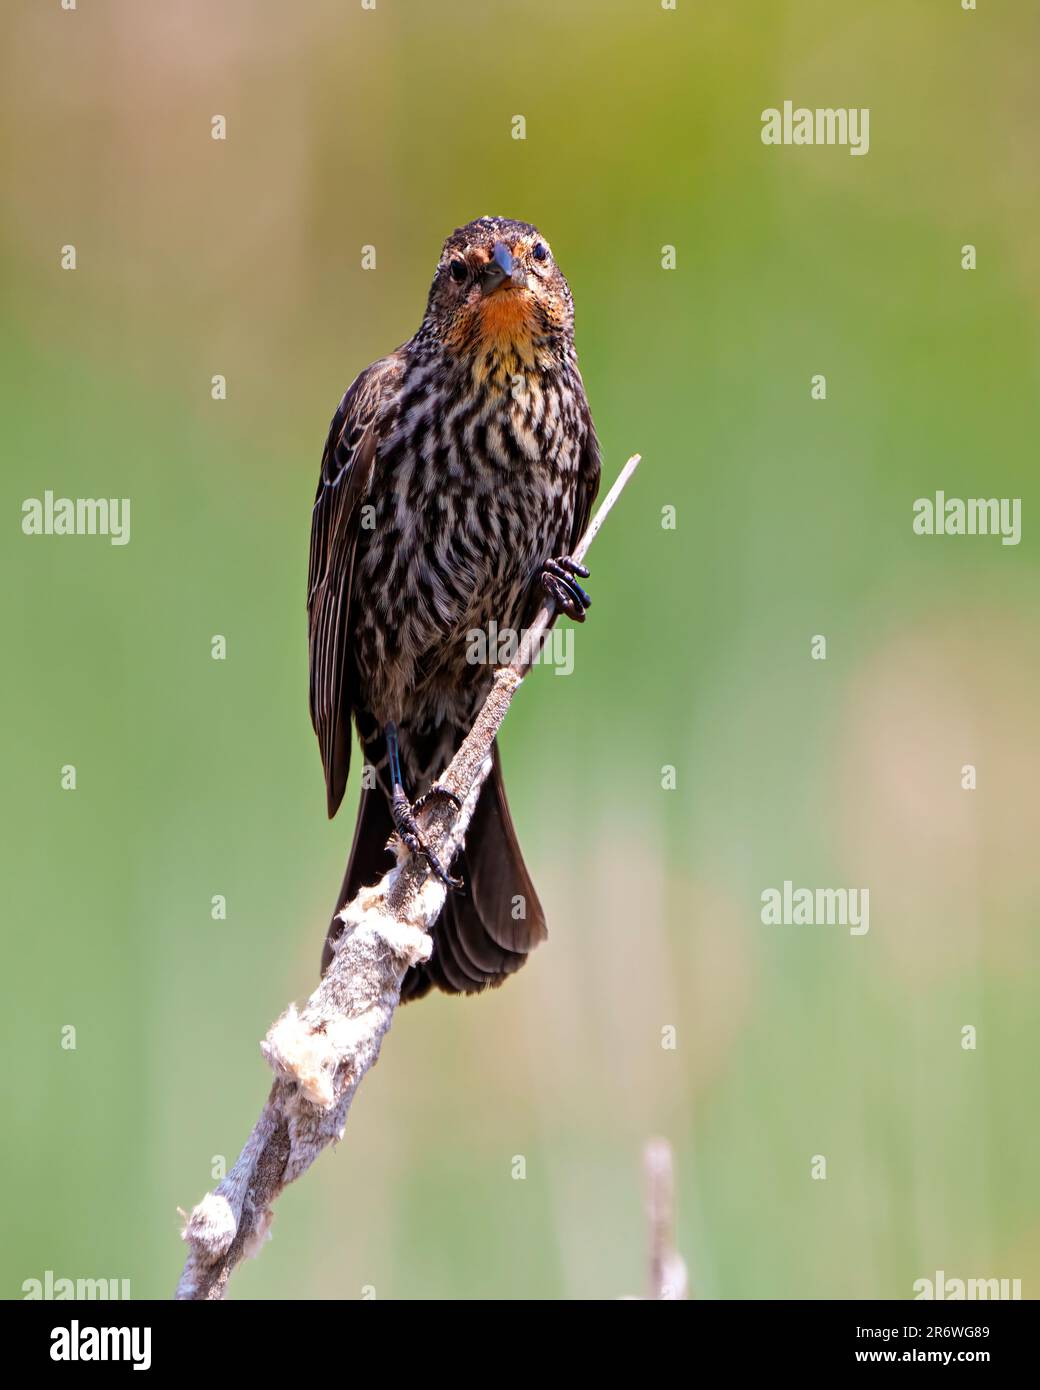 Red-Winged Blackbird female close-up front view, perched on a branch with colourful background in its environment and habitat surrounding. Stock Photo